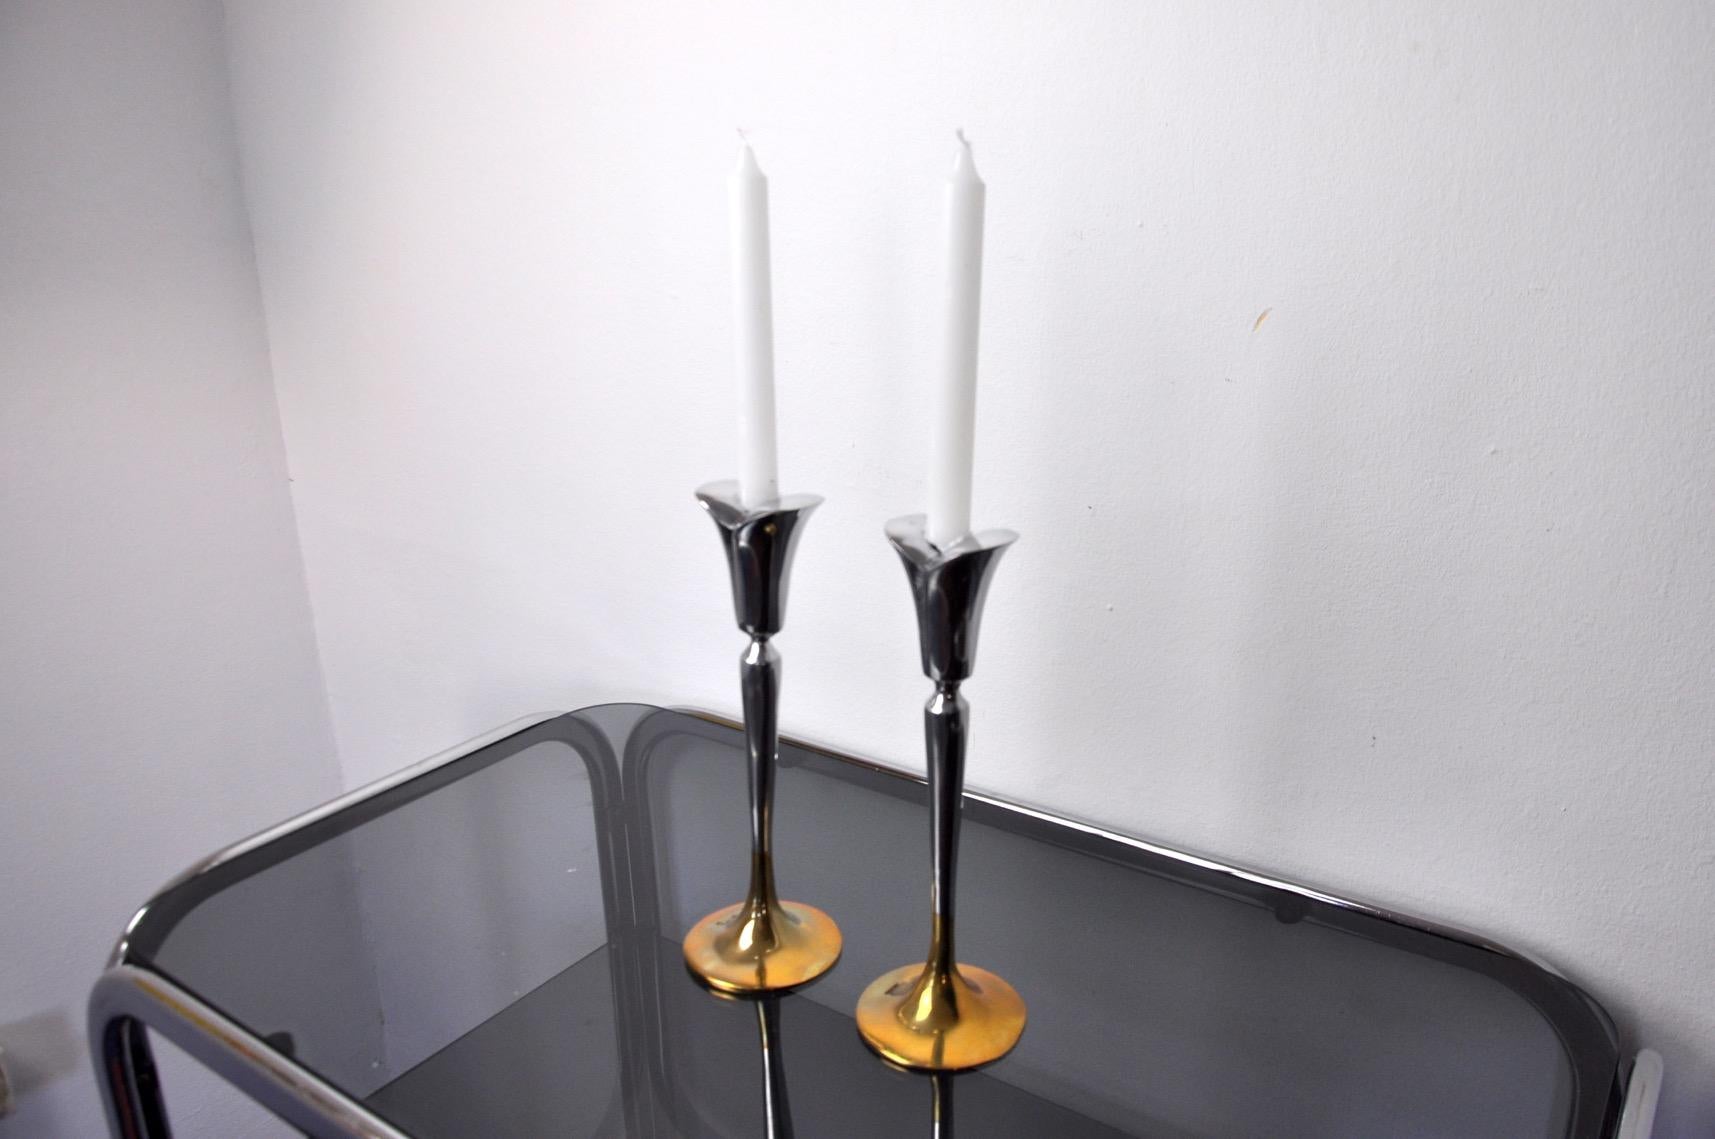 Spanish Pair of Brutalist Candlesticks by Art3, 1970 For Sale